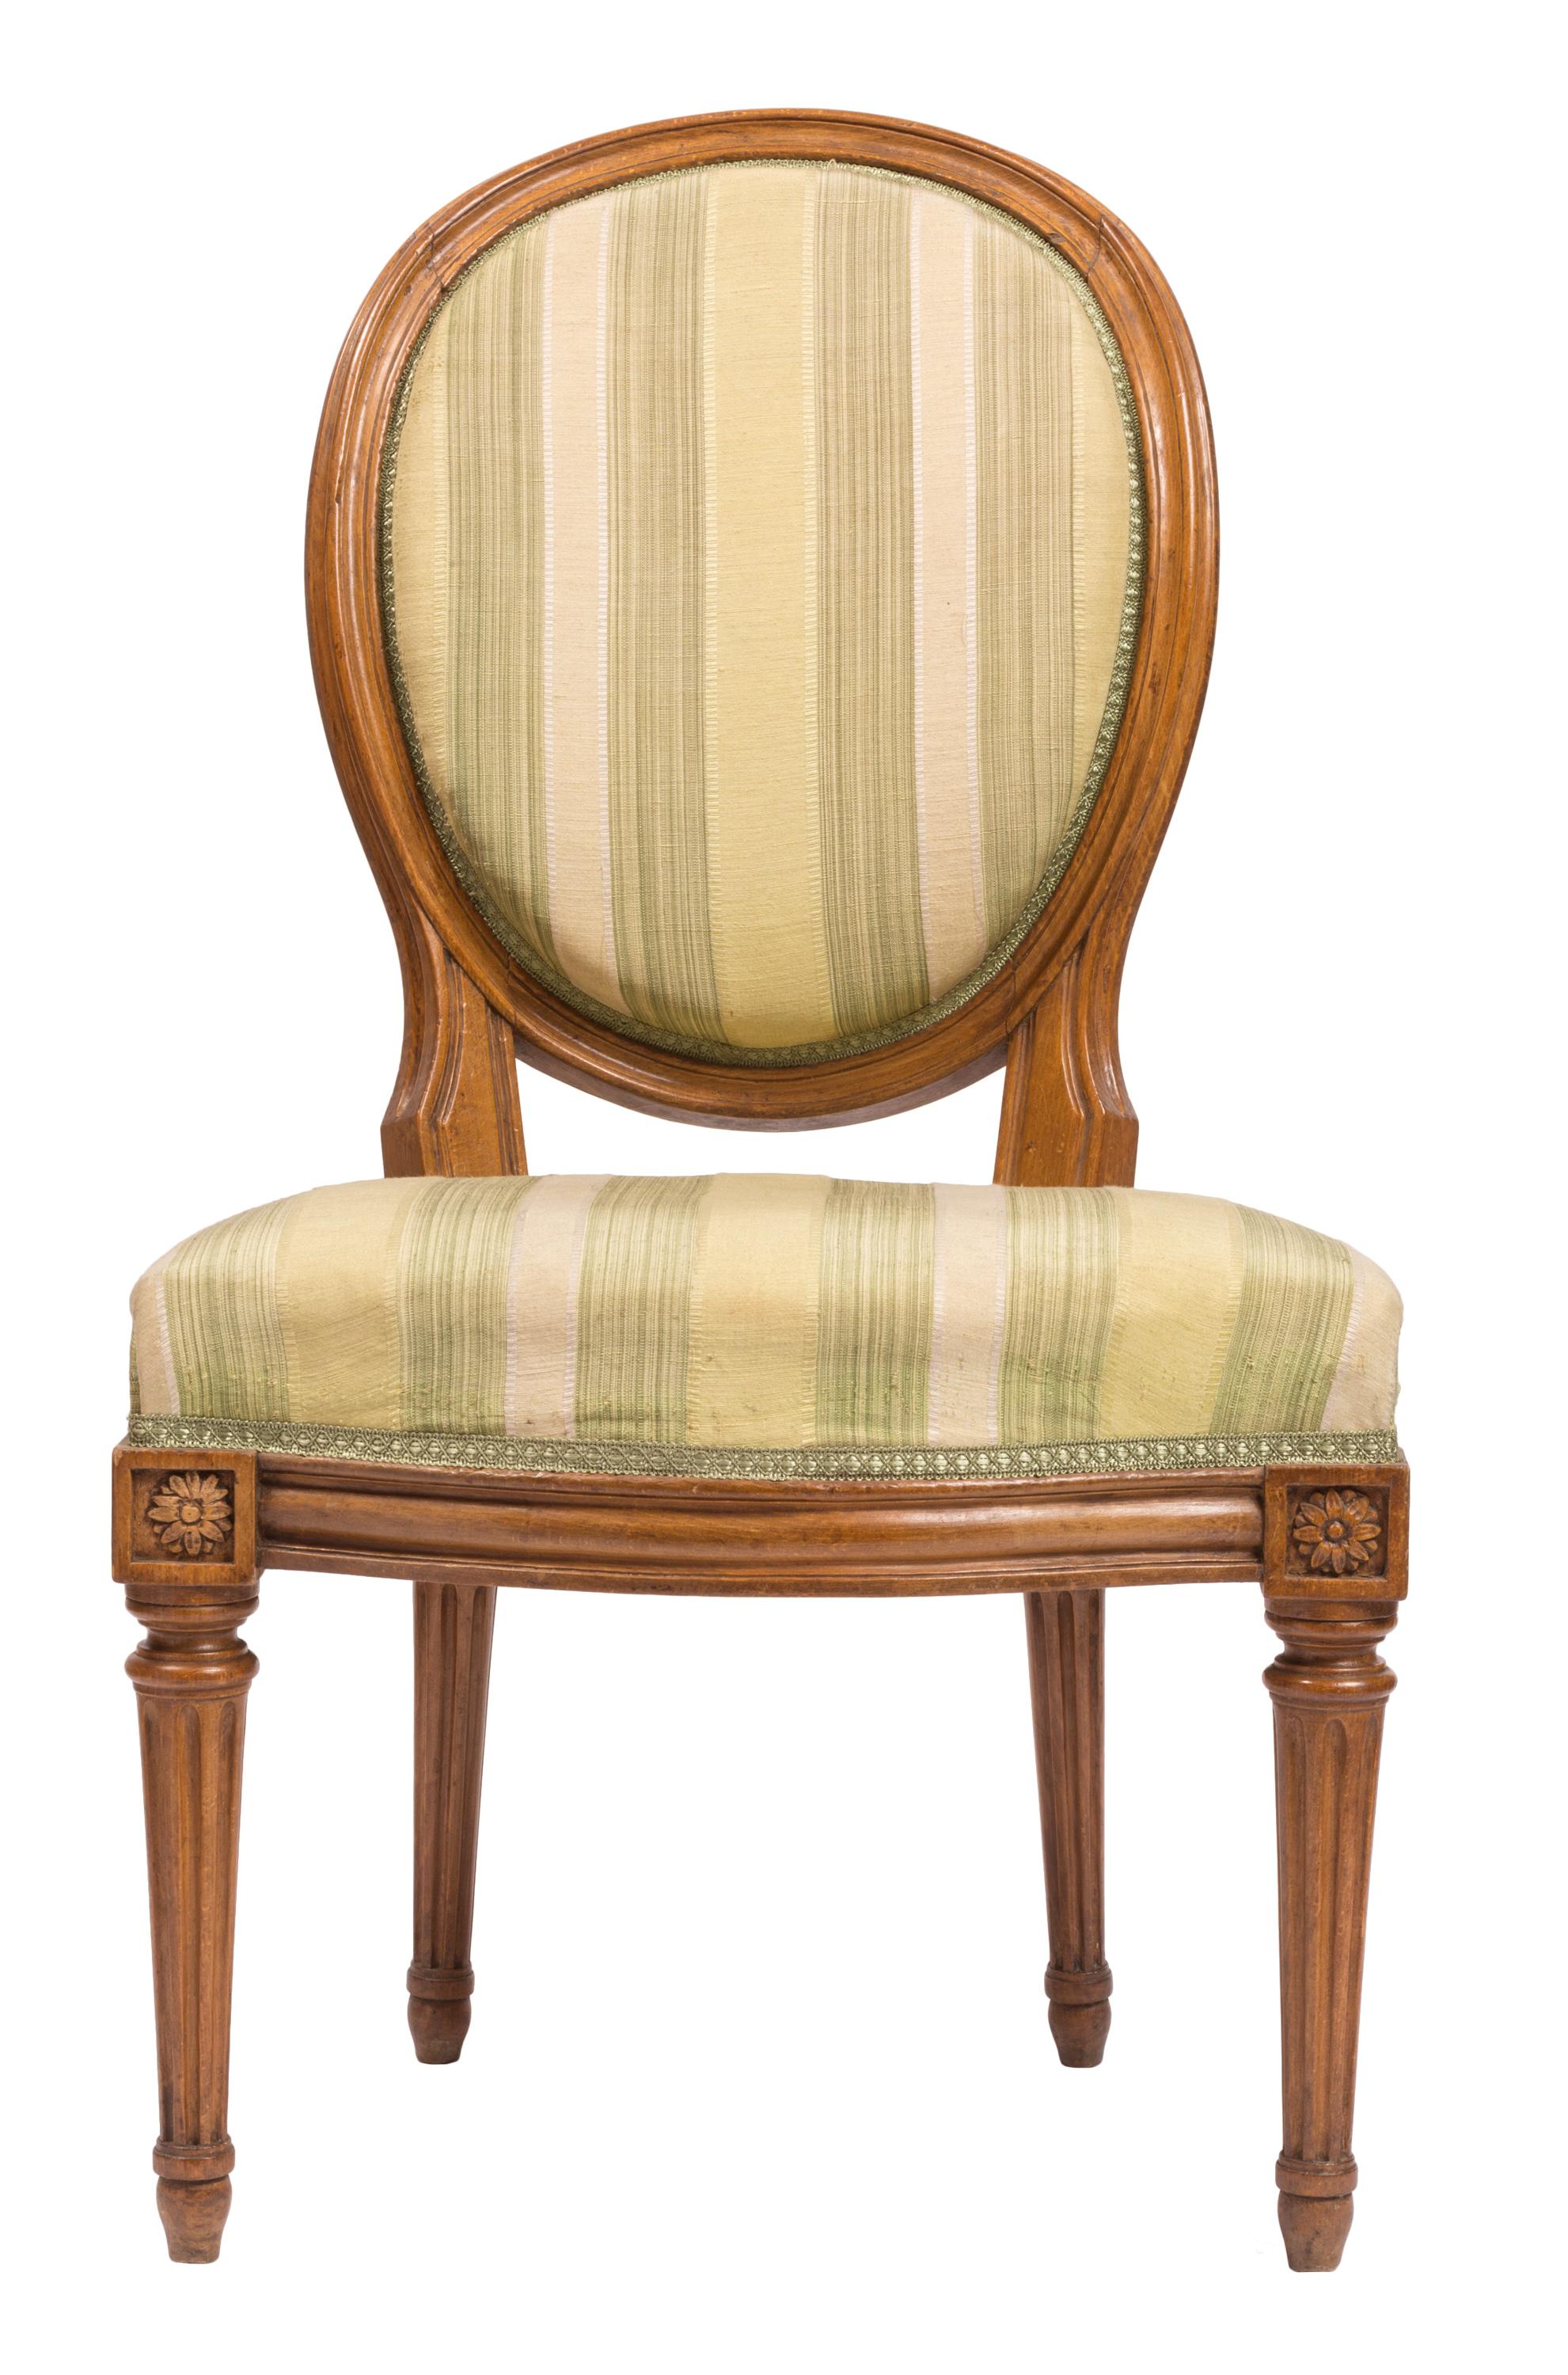 Set of Four Louis XVI Style Chairs with Striped Silk Upholstery, 19th Century For Sale 5